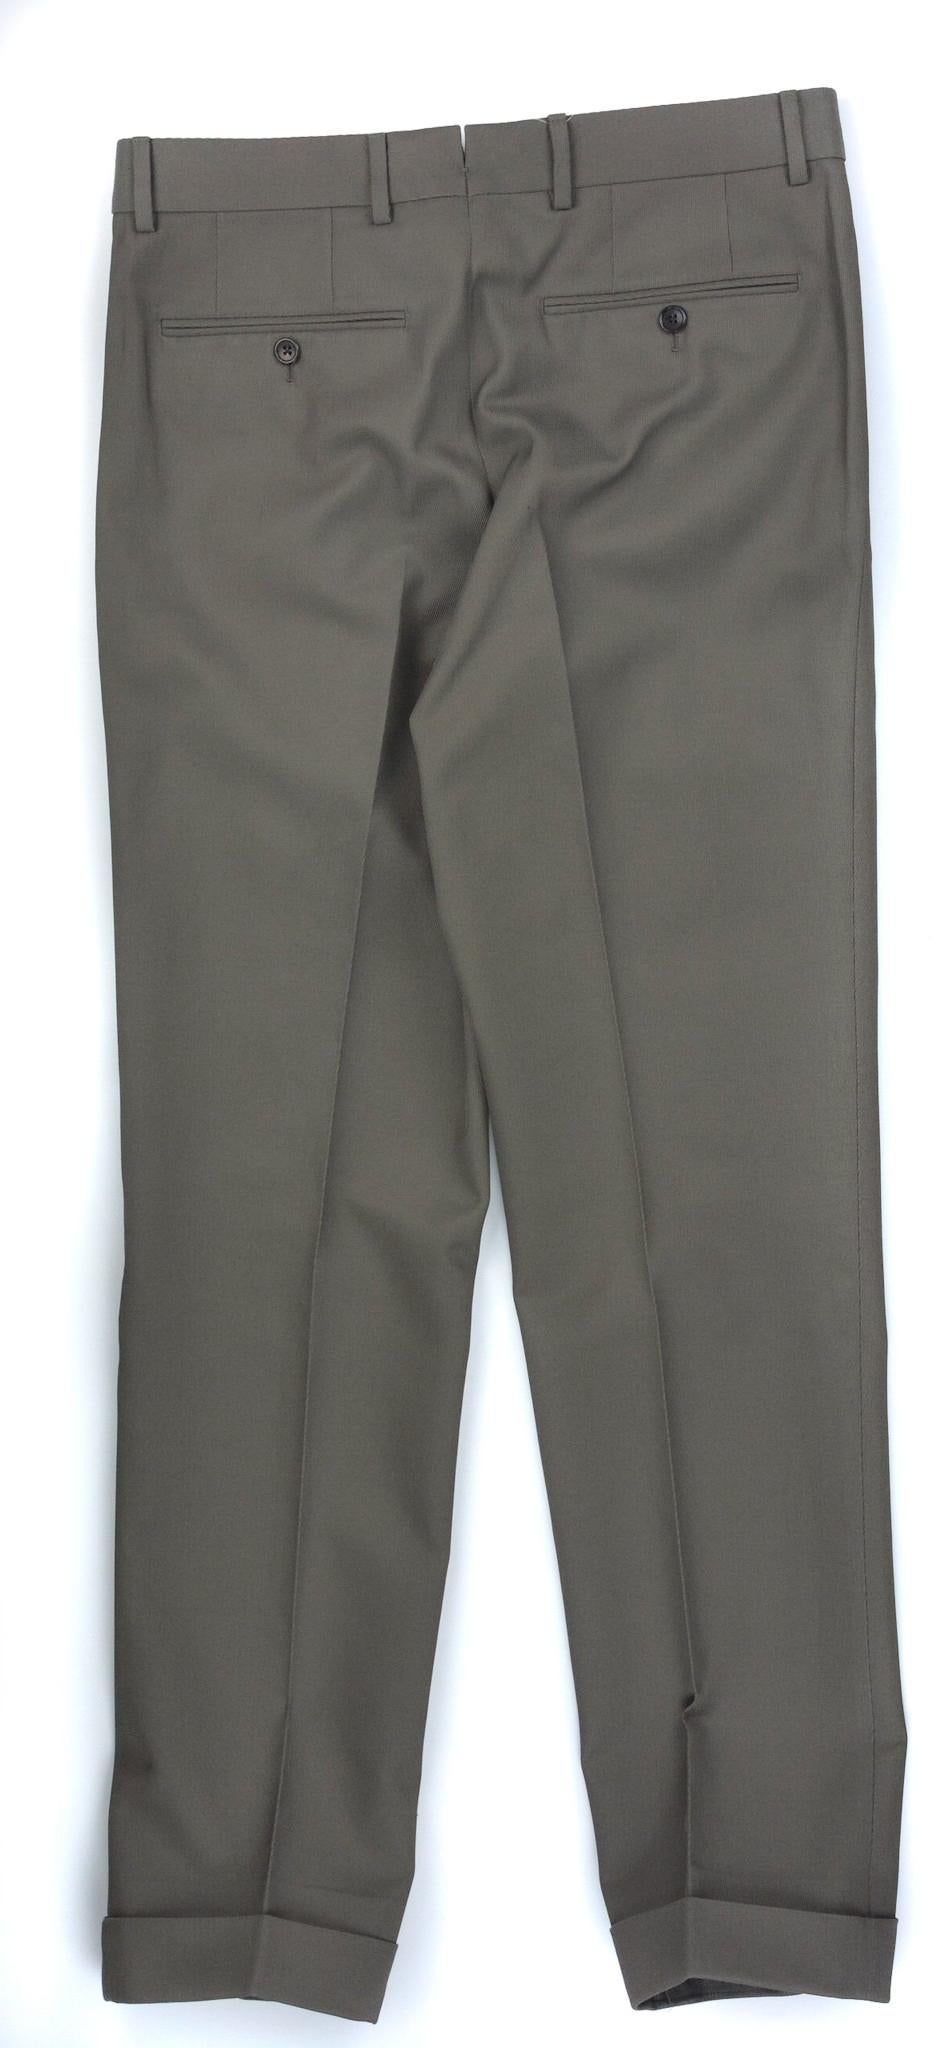 Tom Ford's pleated front trousers will provide subtle sophistication to your ensemble. These pants feature crisp pleated front lines, concealed pockets, and concealed hem cuffs. You can pair these pants with a crisp white top for the ultimate